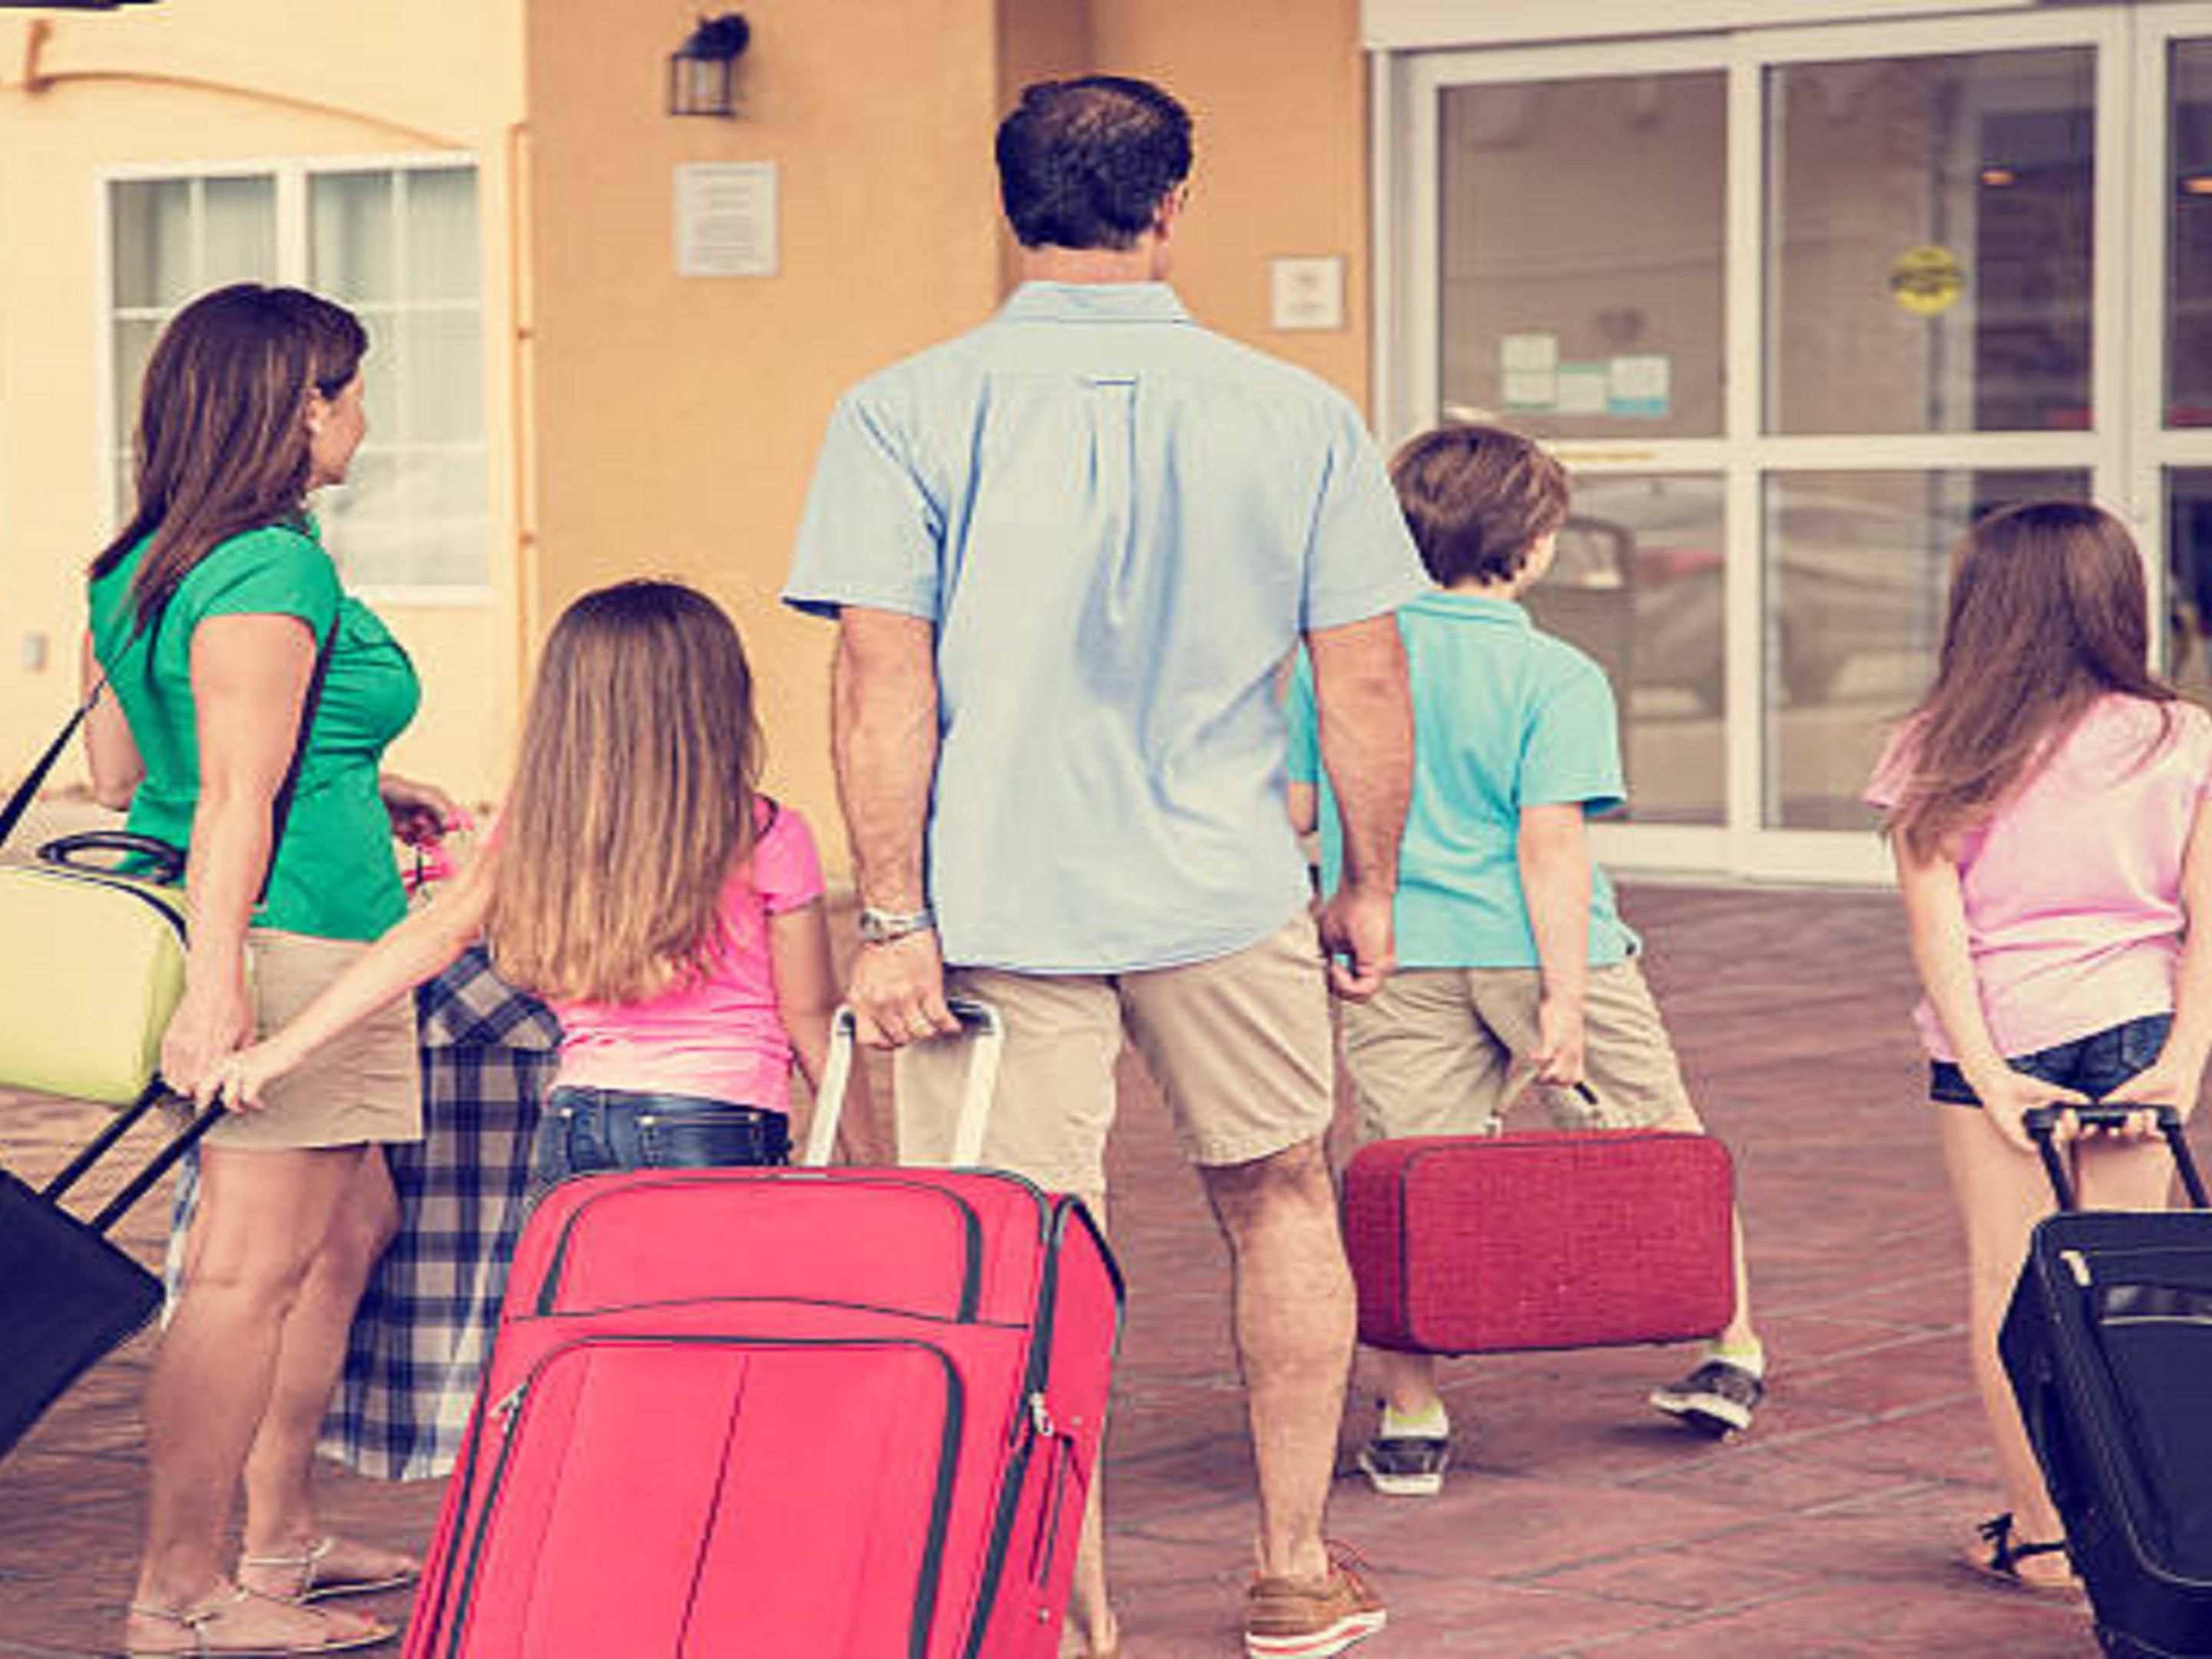 Maximize your travel convenience with our complimentary airport shuttle service, operating every day from 5:15am to 12:30am at Holiday Inn Vancouver Airport - Richmond.
Need airport transportation outside these hours? Simply call 1-888-831-3388. Book now to unlock stress-free transfers and start your journey hassle-free!